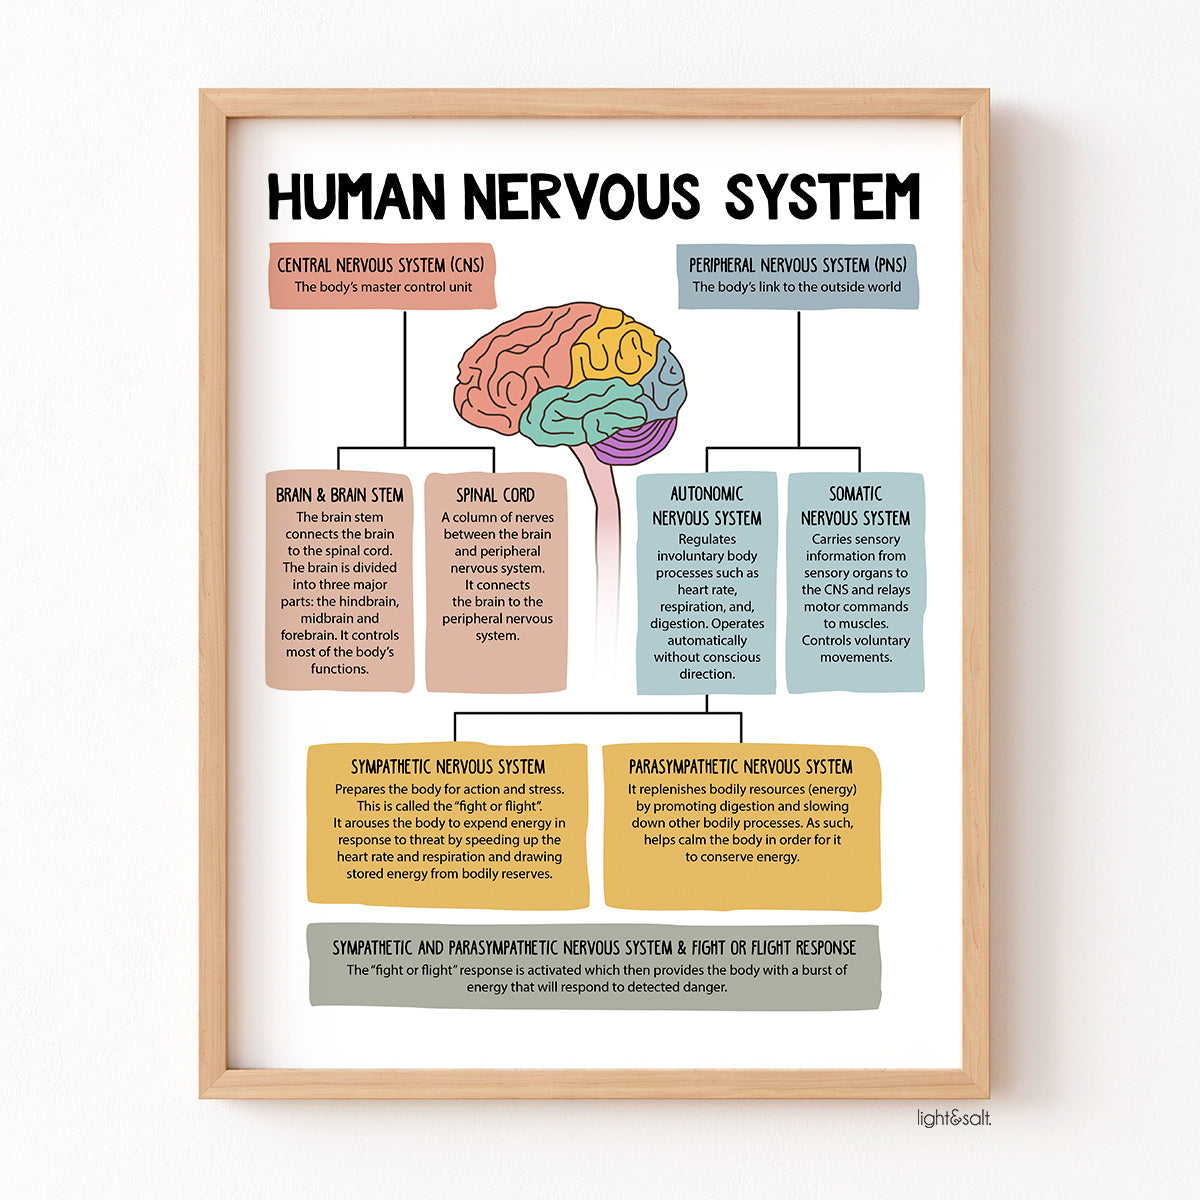 The Human Nervous System poster